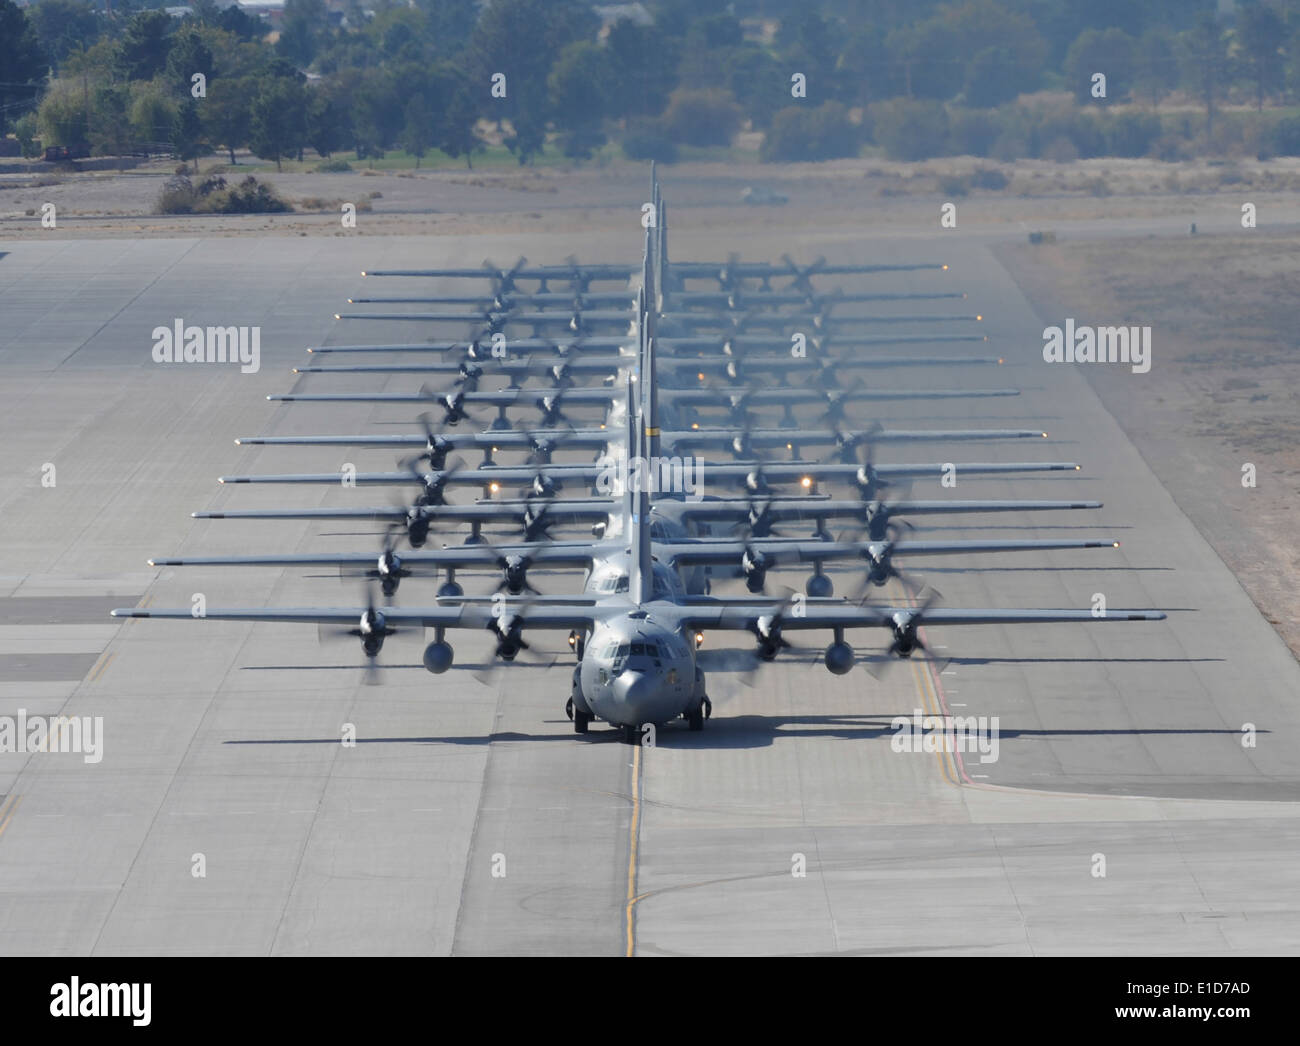 A row of C-130 Hercules aircraft taxi on Nellis Air Force Base, Nev., Nov. 18, 2009, during a Mobility Air Forces Exercise (MAF Stock Photo